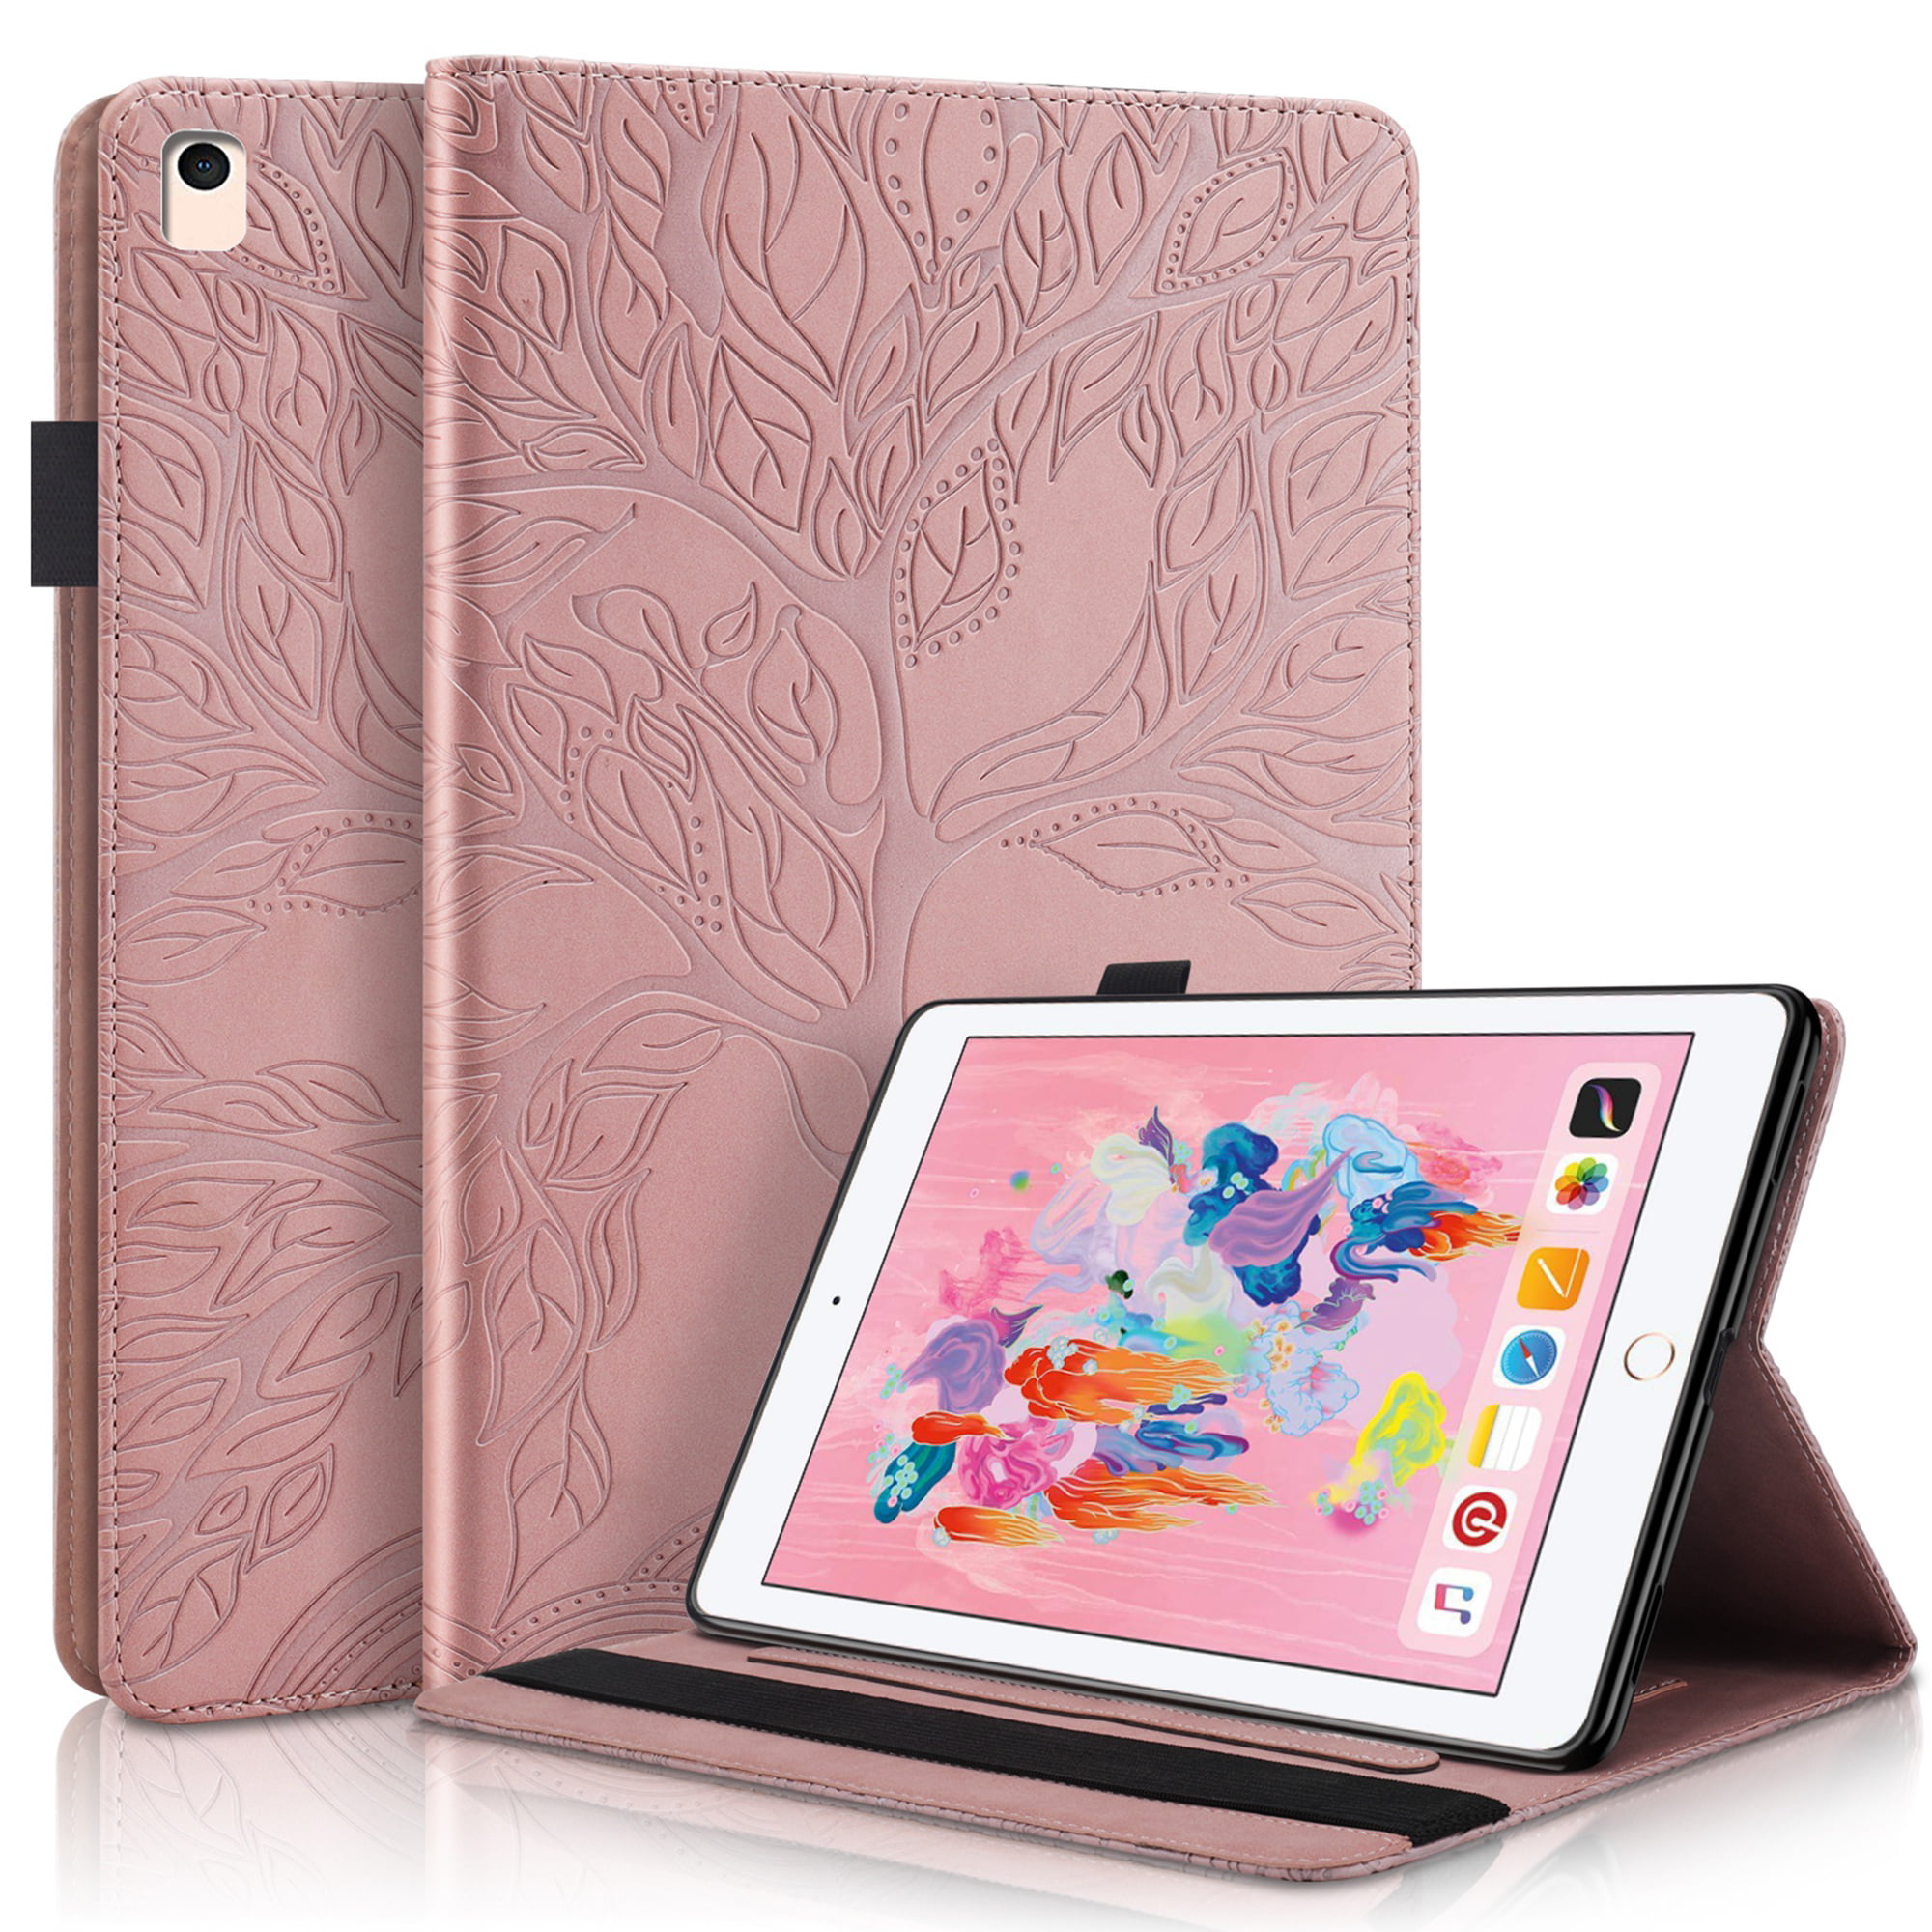 Dteck Case for iPad 9.7 (6th/5th Generation), iPad Air 2 Case A1566, iPad  Air Case 1st Generation - Fold Stand Cute Case Leather Flip Wallet Cover